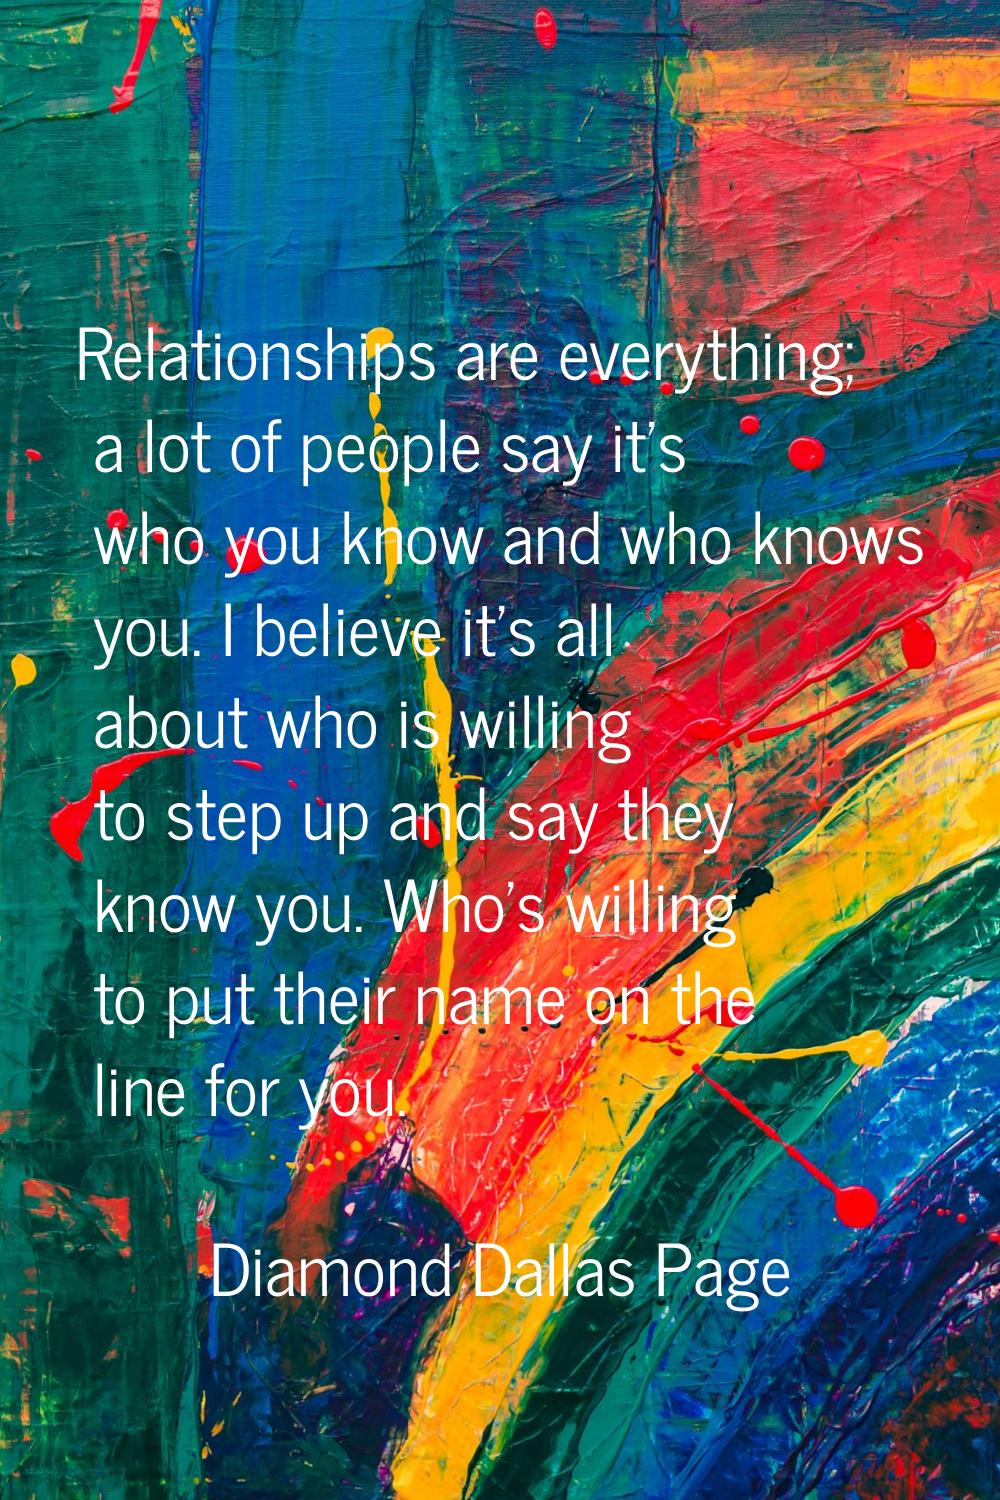 Relationships are everything; a lot of people say it's who you know and who knows you. I believe it